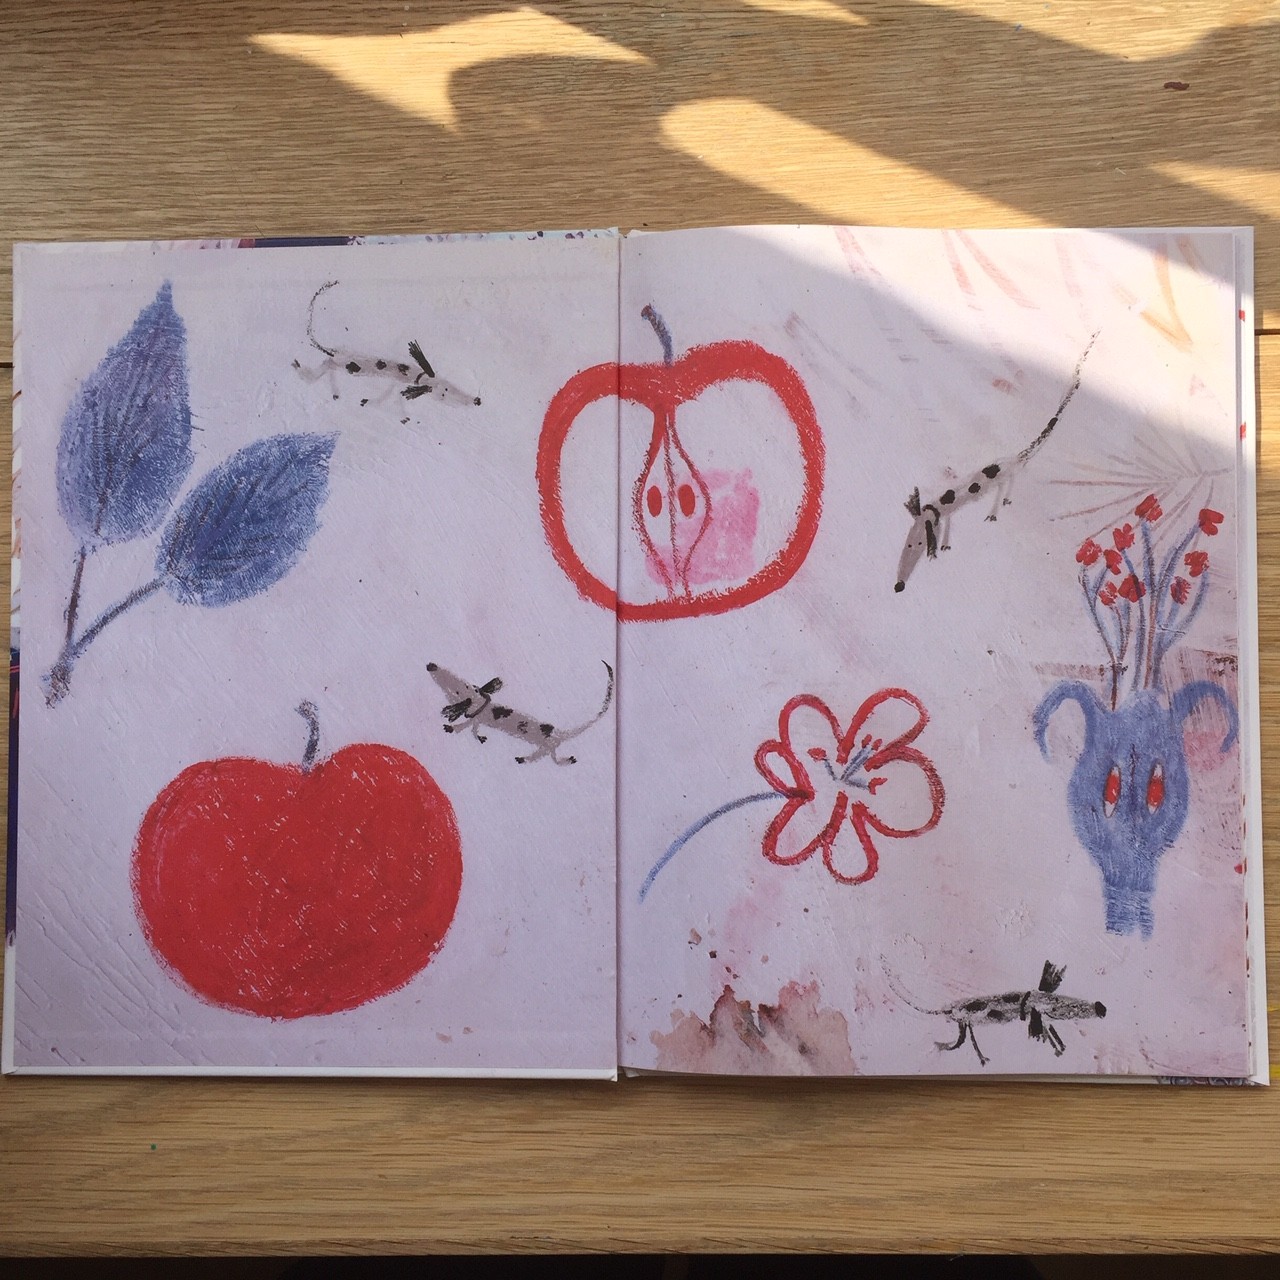 endpapers from a childrens book with drawings of apples, flowers and dogs